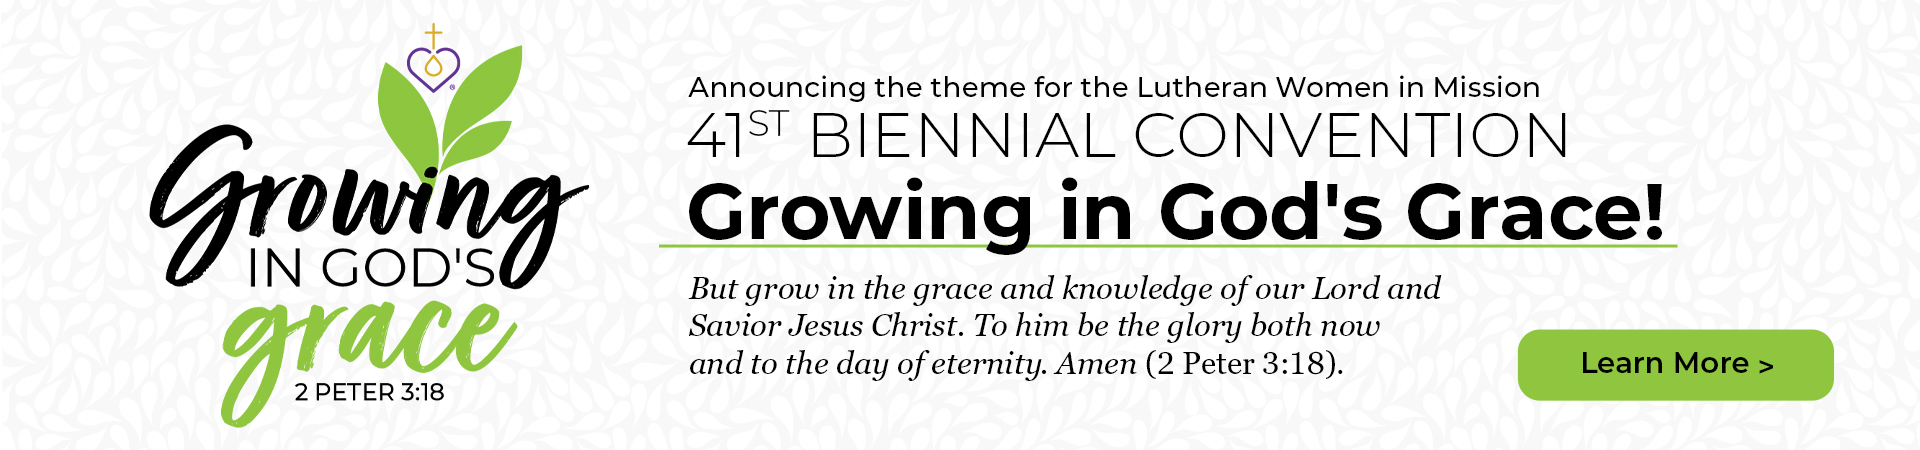 Announcing the theme for the 41st Biennial Lutheran Women in Mission Convention: Growing in God's Grace. 